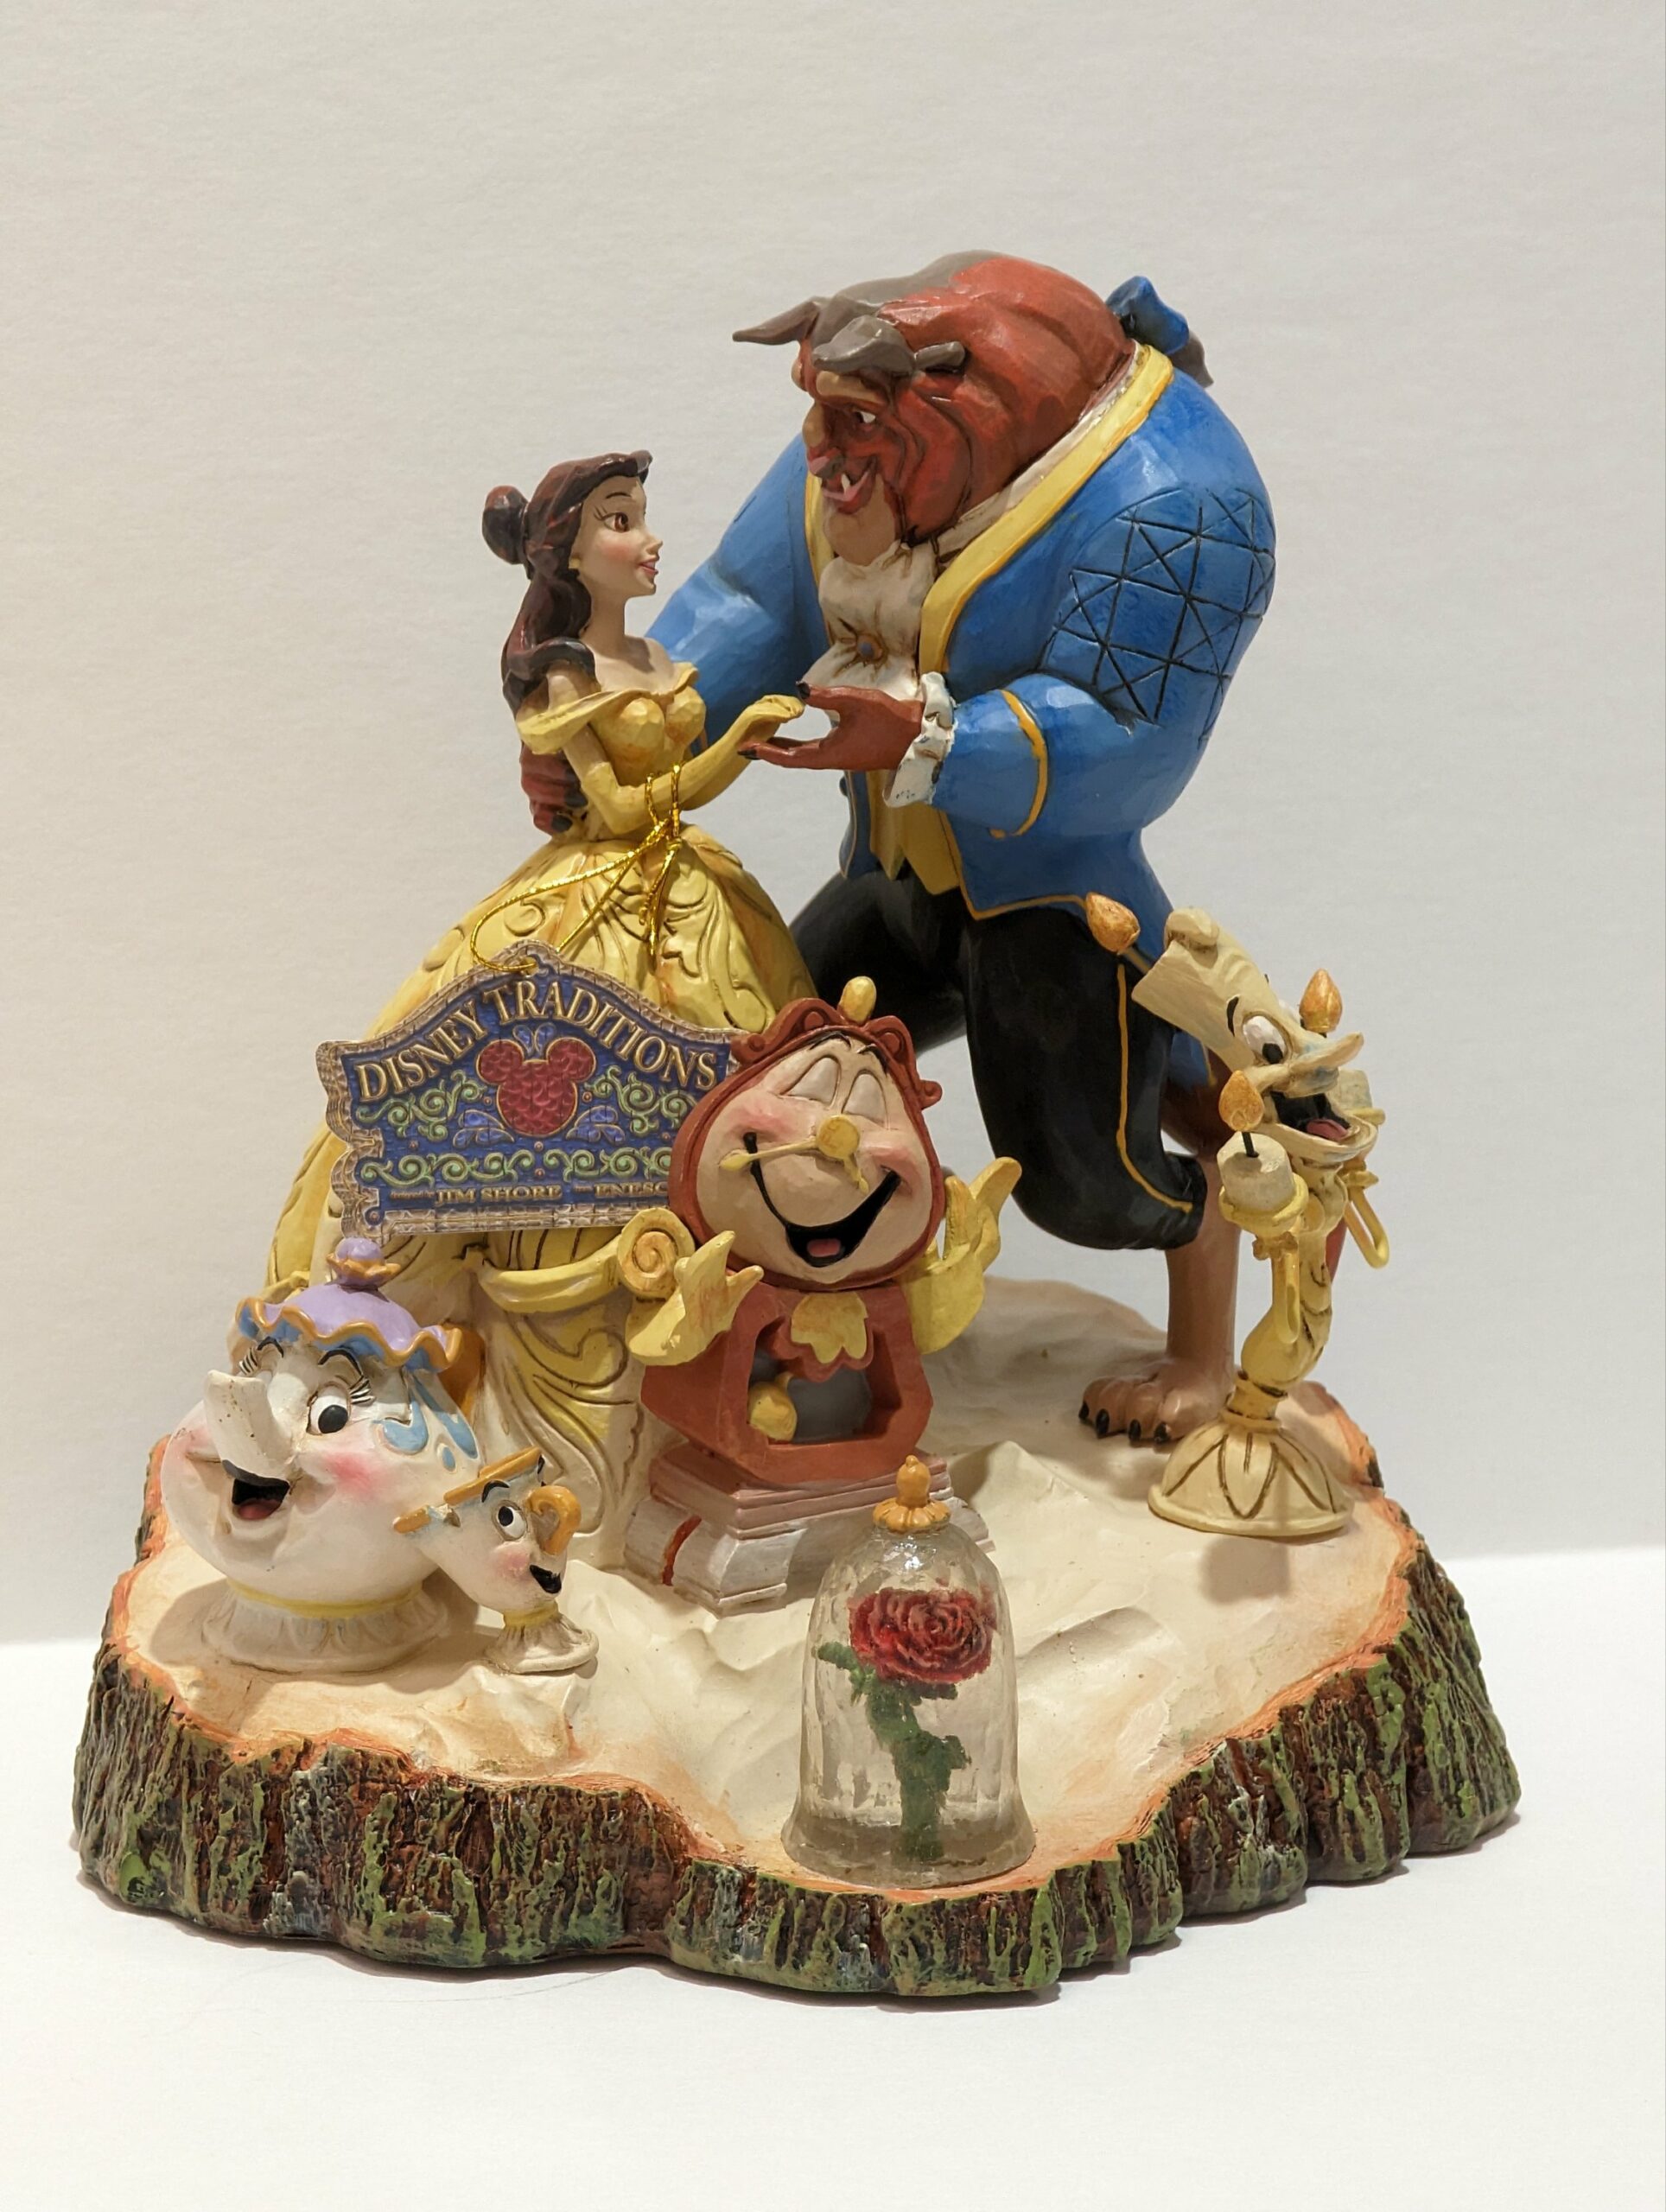 Enesco Disney Traditions by Jim Shore “Tale as Old as Time” Beauty and the  Beast Figurine 4031487 - Treasure Trove Collectibles & Marketplace